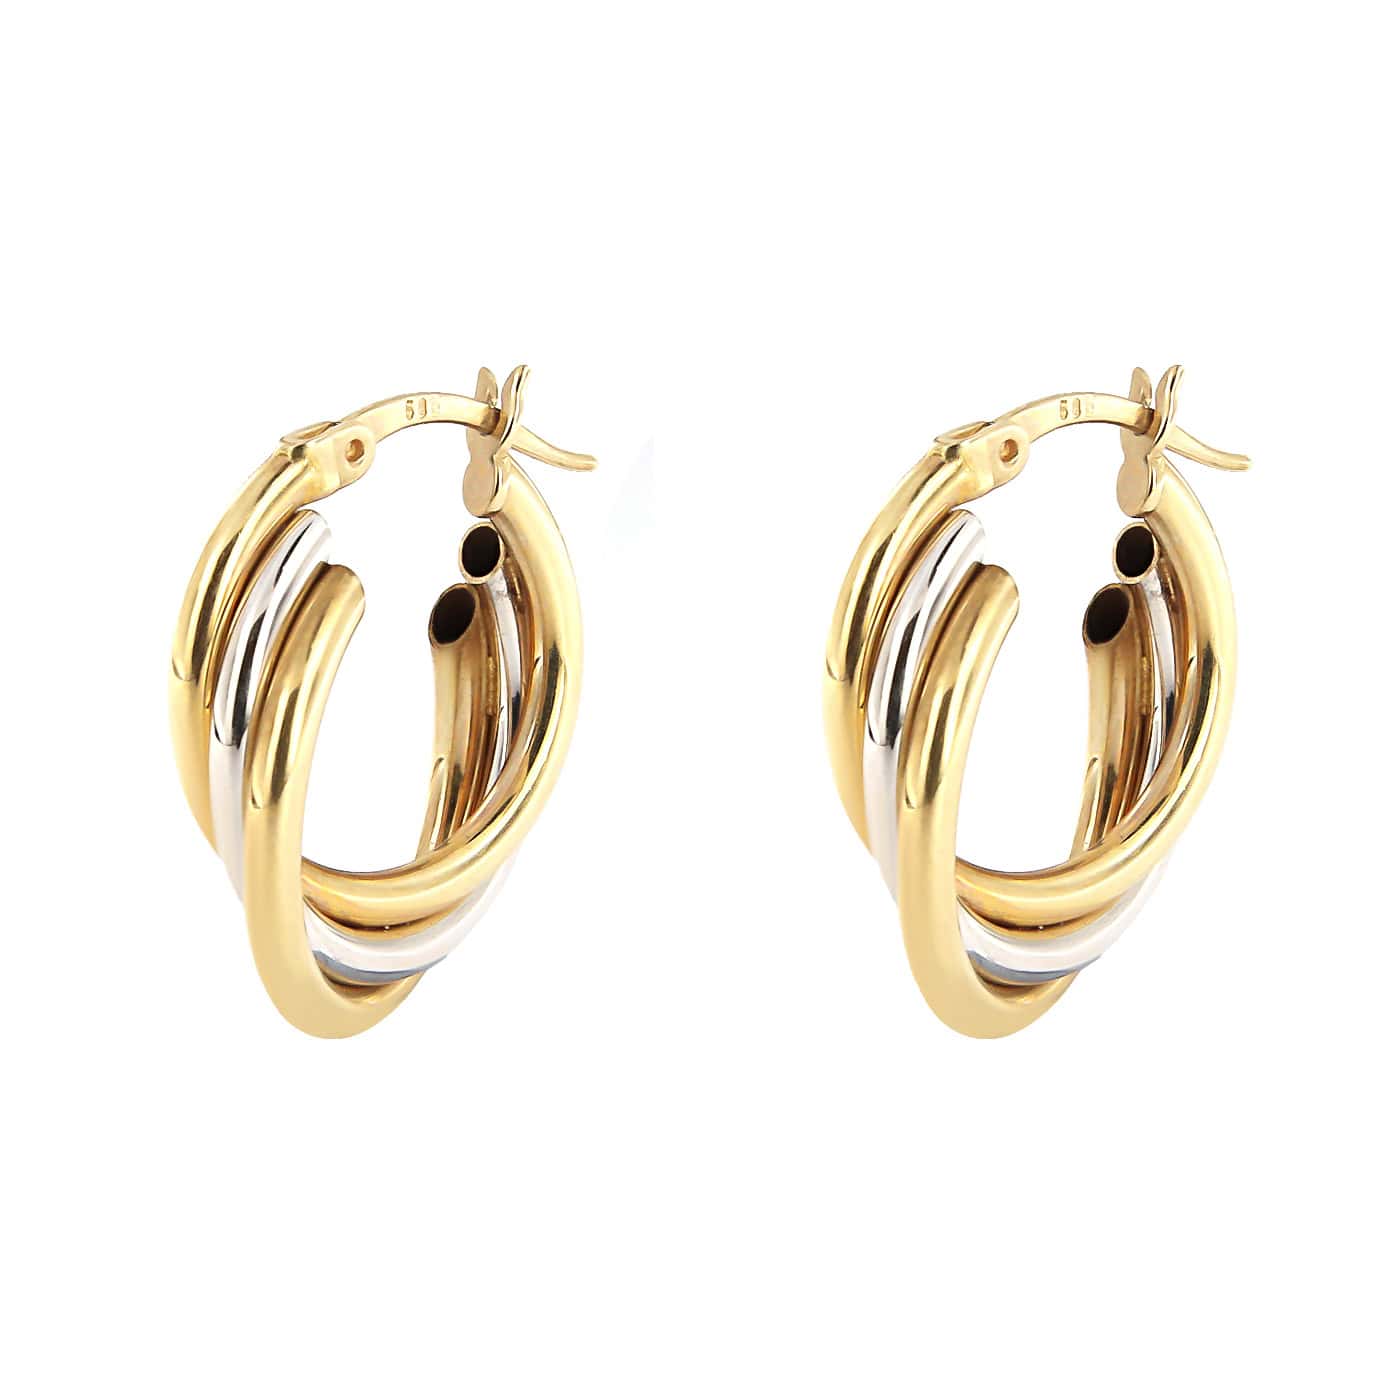 GOLD WHITE AND ROSE GOLD TONE SMALL HOOPS 14K GOLD